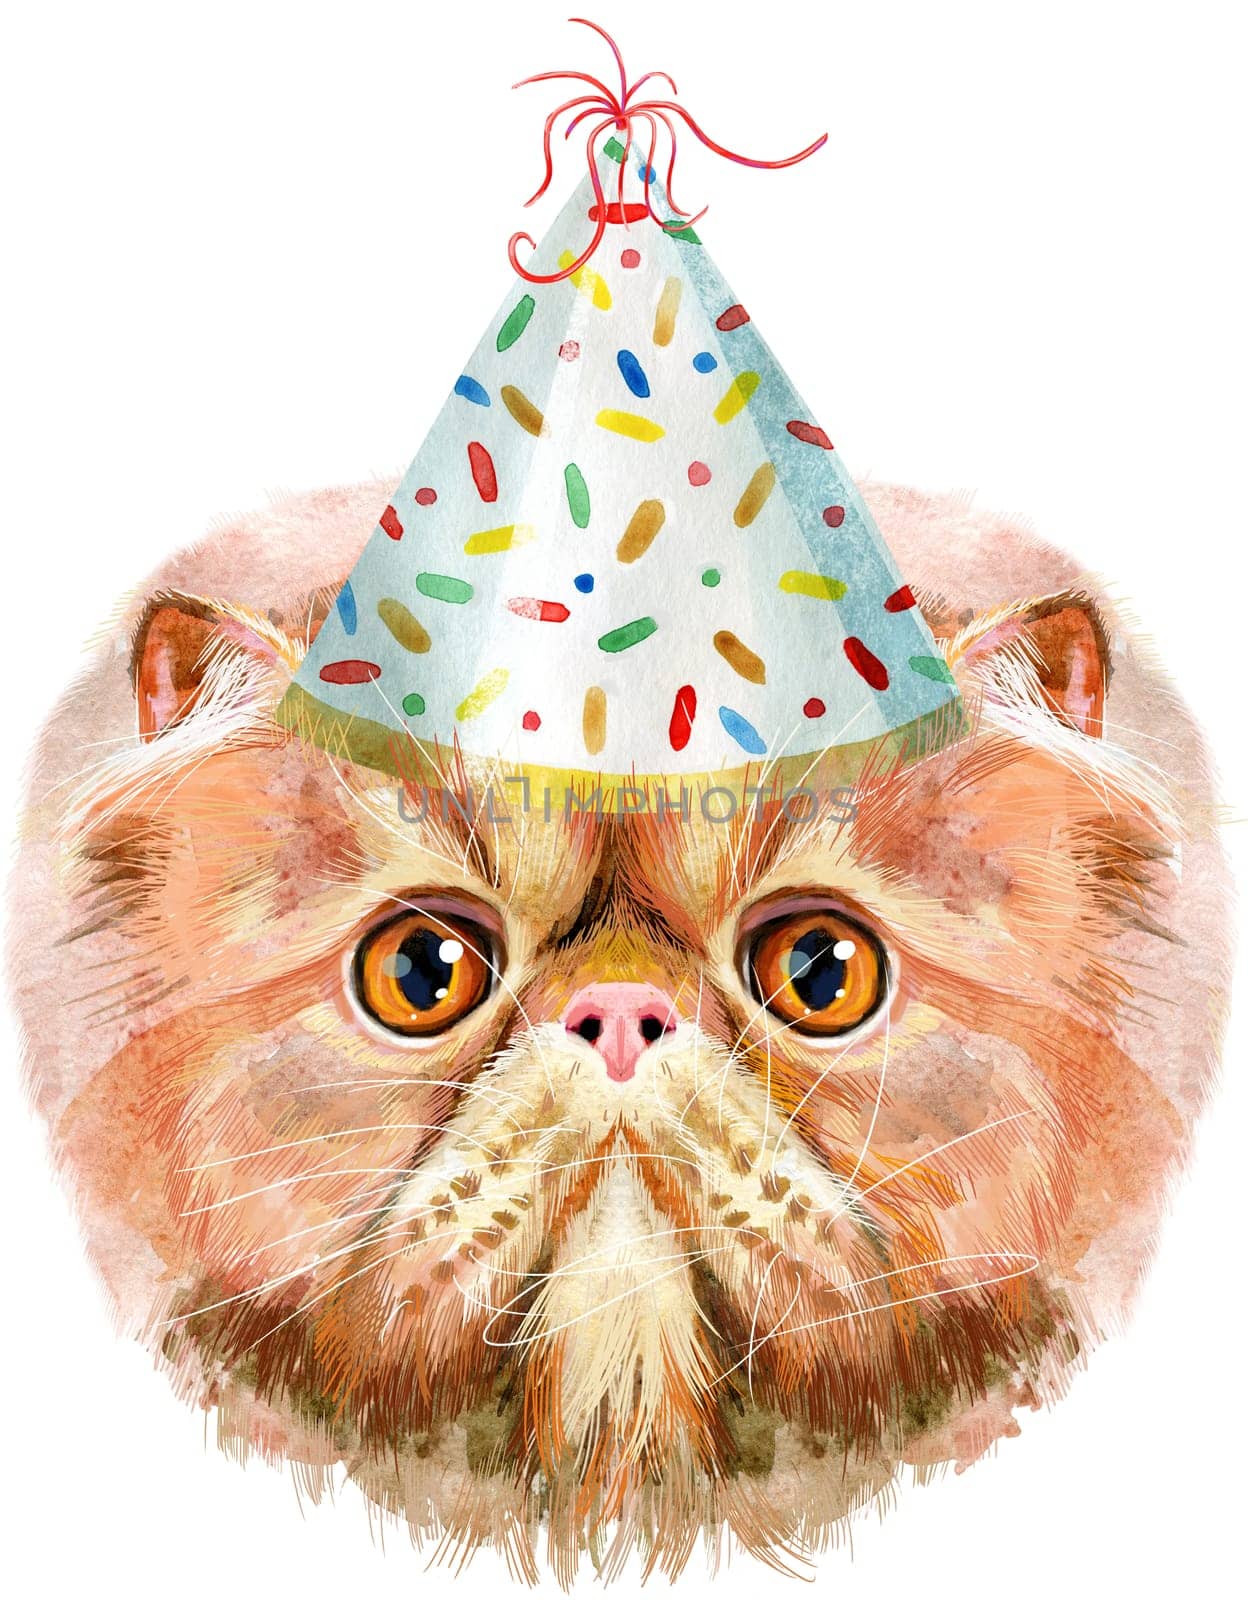 Cute cat in party hat. Cat for t-shirt graphics. Watercolor Exotic Shorthair cat breed illustration